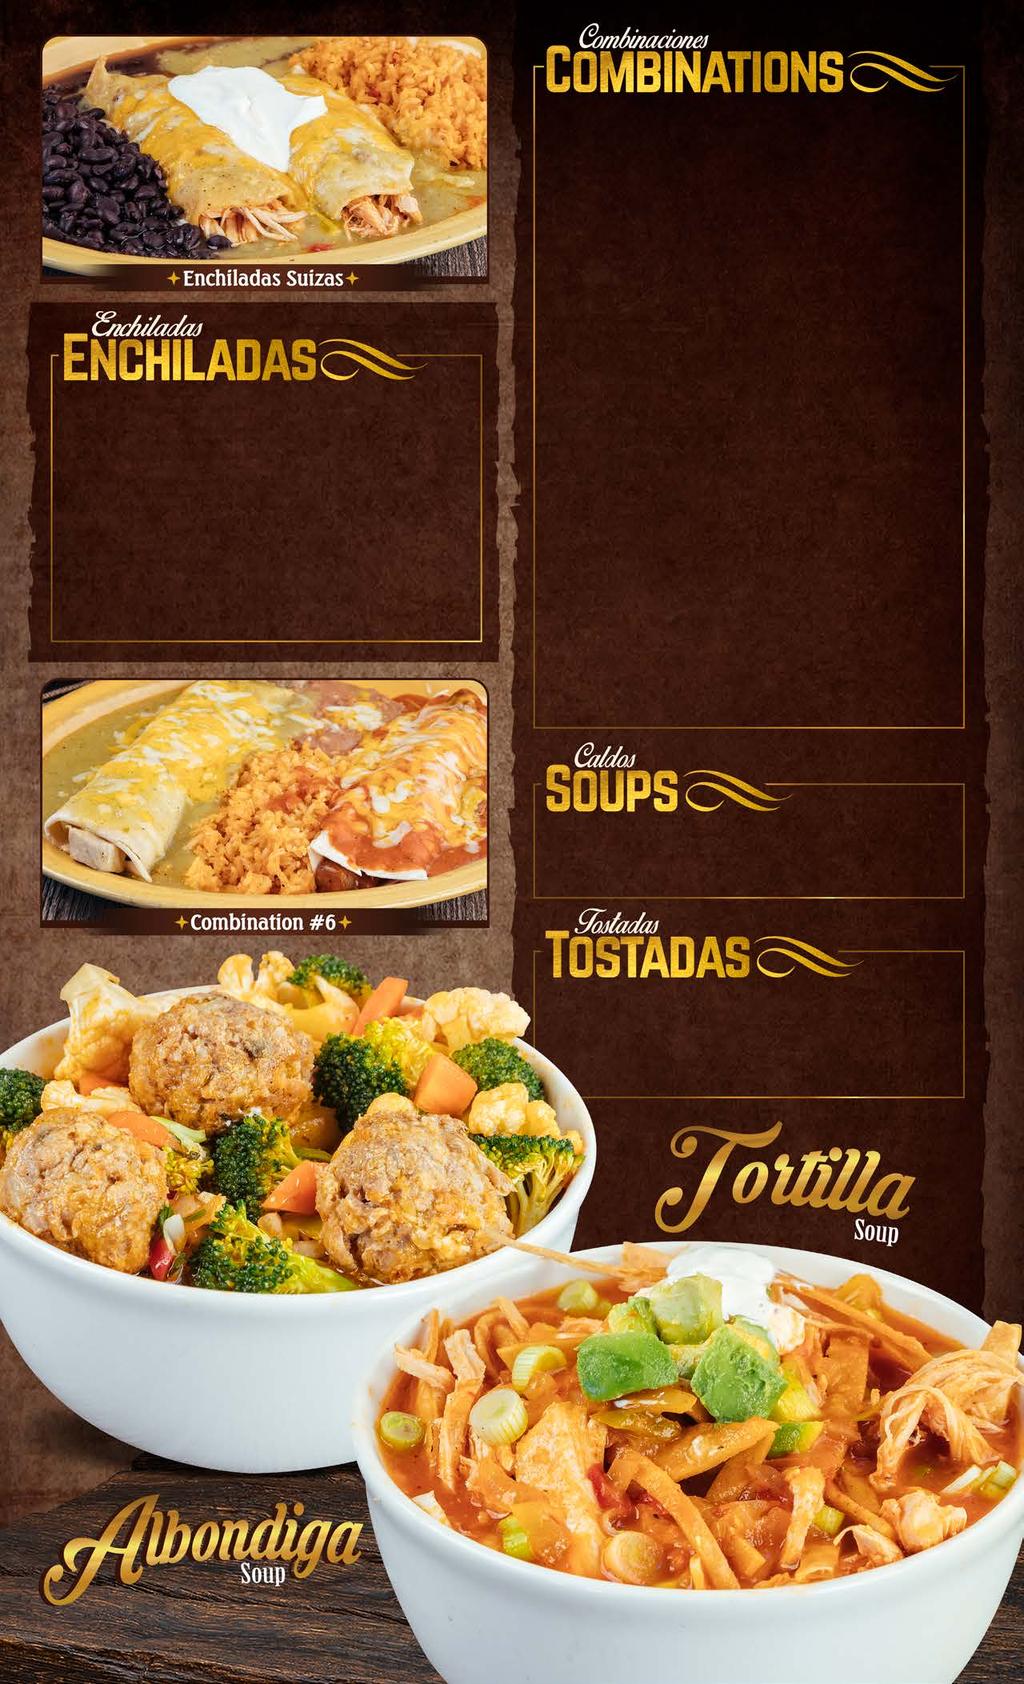 Served with rice and beans Deluxe (2 corn tortillas) Enchiladas Plate (2) 11.75 Served with rice and beans. Choice of Pork Shredded Beef Chicken Ground Beef. Add a extra enchilada for $1.